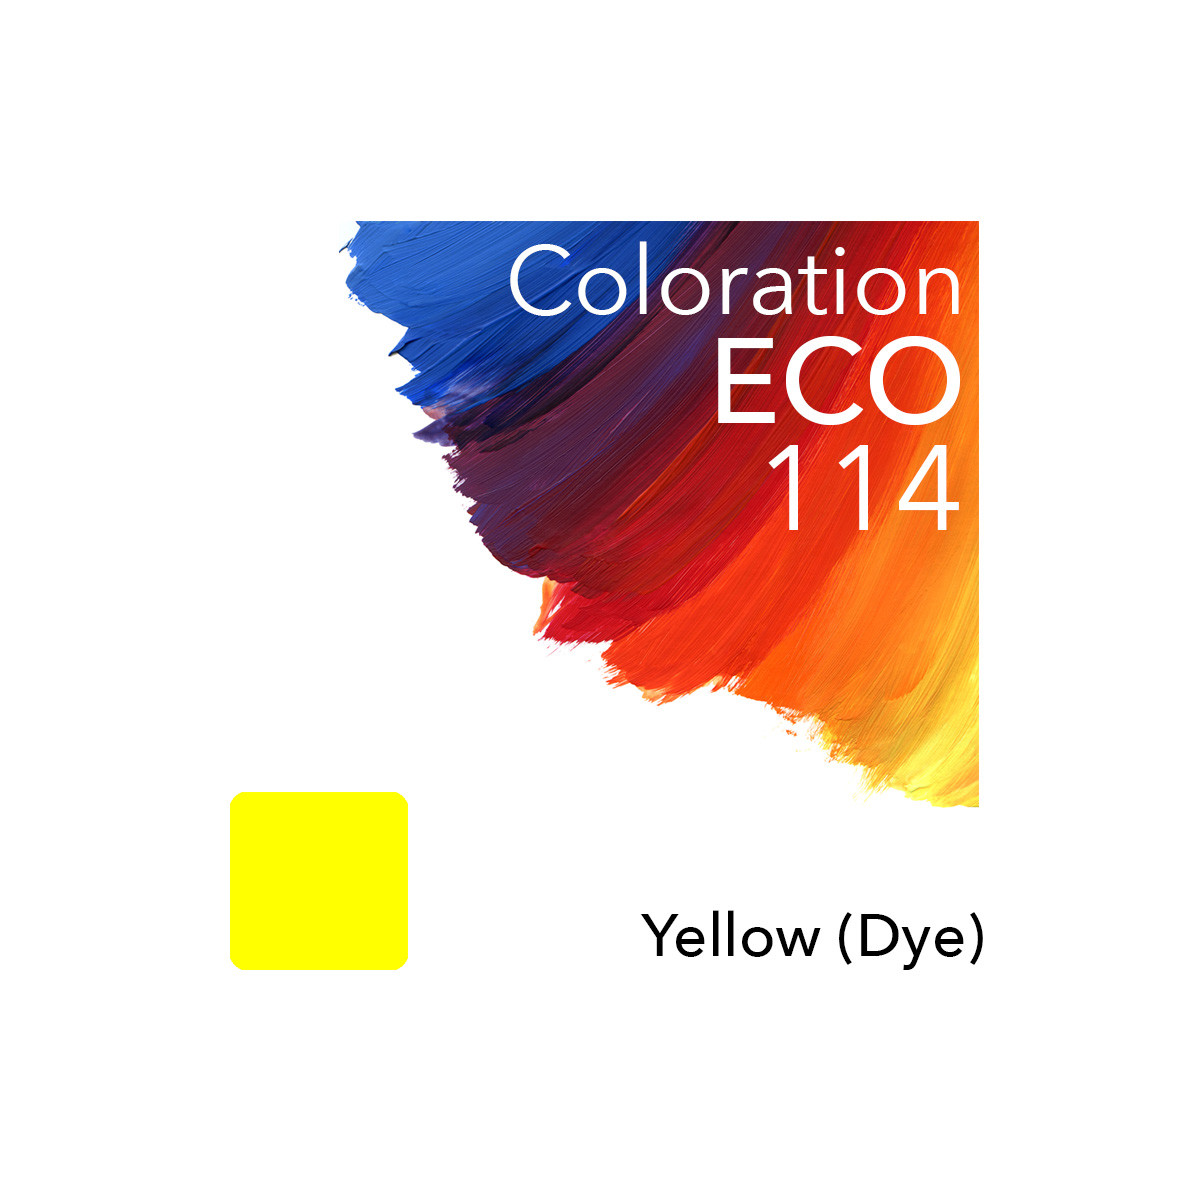 Coloration ECO compatible to Epson 114 Y (Yellow)